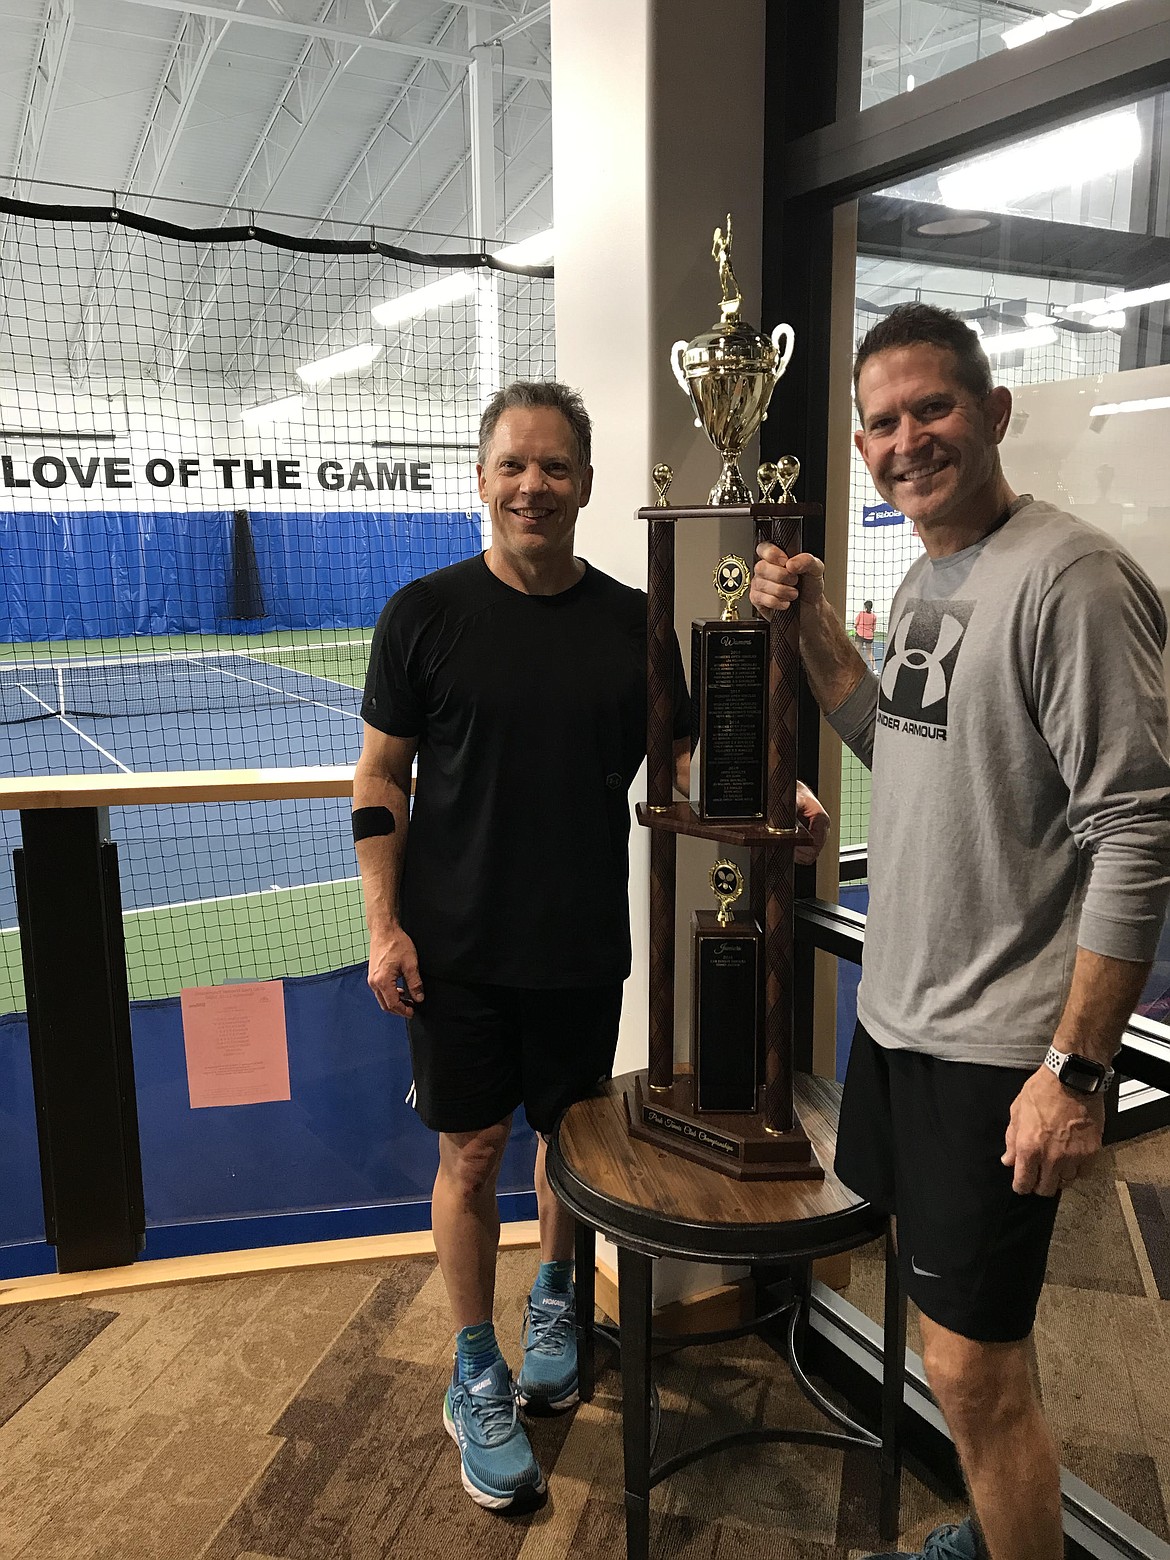 Courtesy photo
Duke Dixon and John Ukich Jr. won the men's open doubles title at the recent Peak Hayden Member Club Tennis Tournament at Peak Health and Wellness in Hayden. Tim Qualls and Doug Conboy were the other finalists.